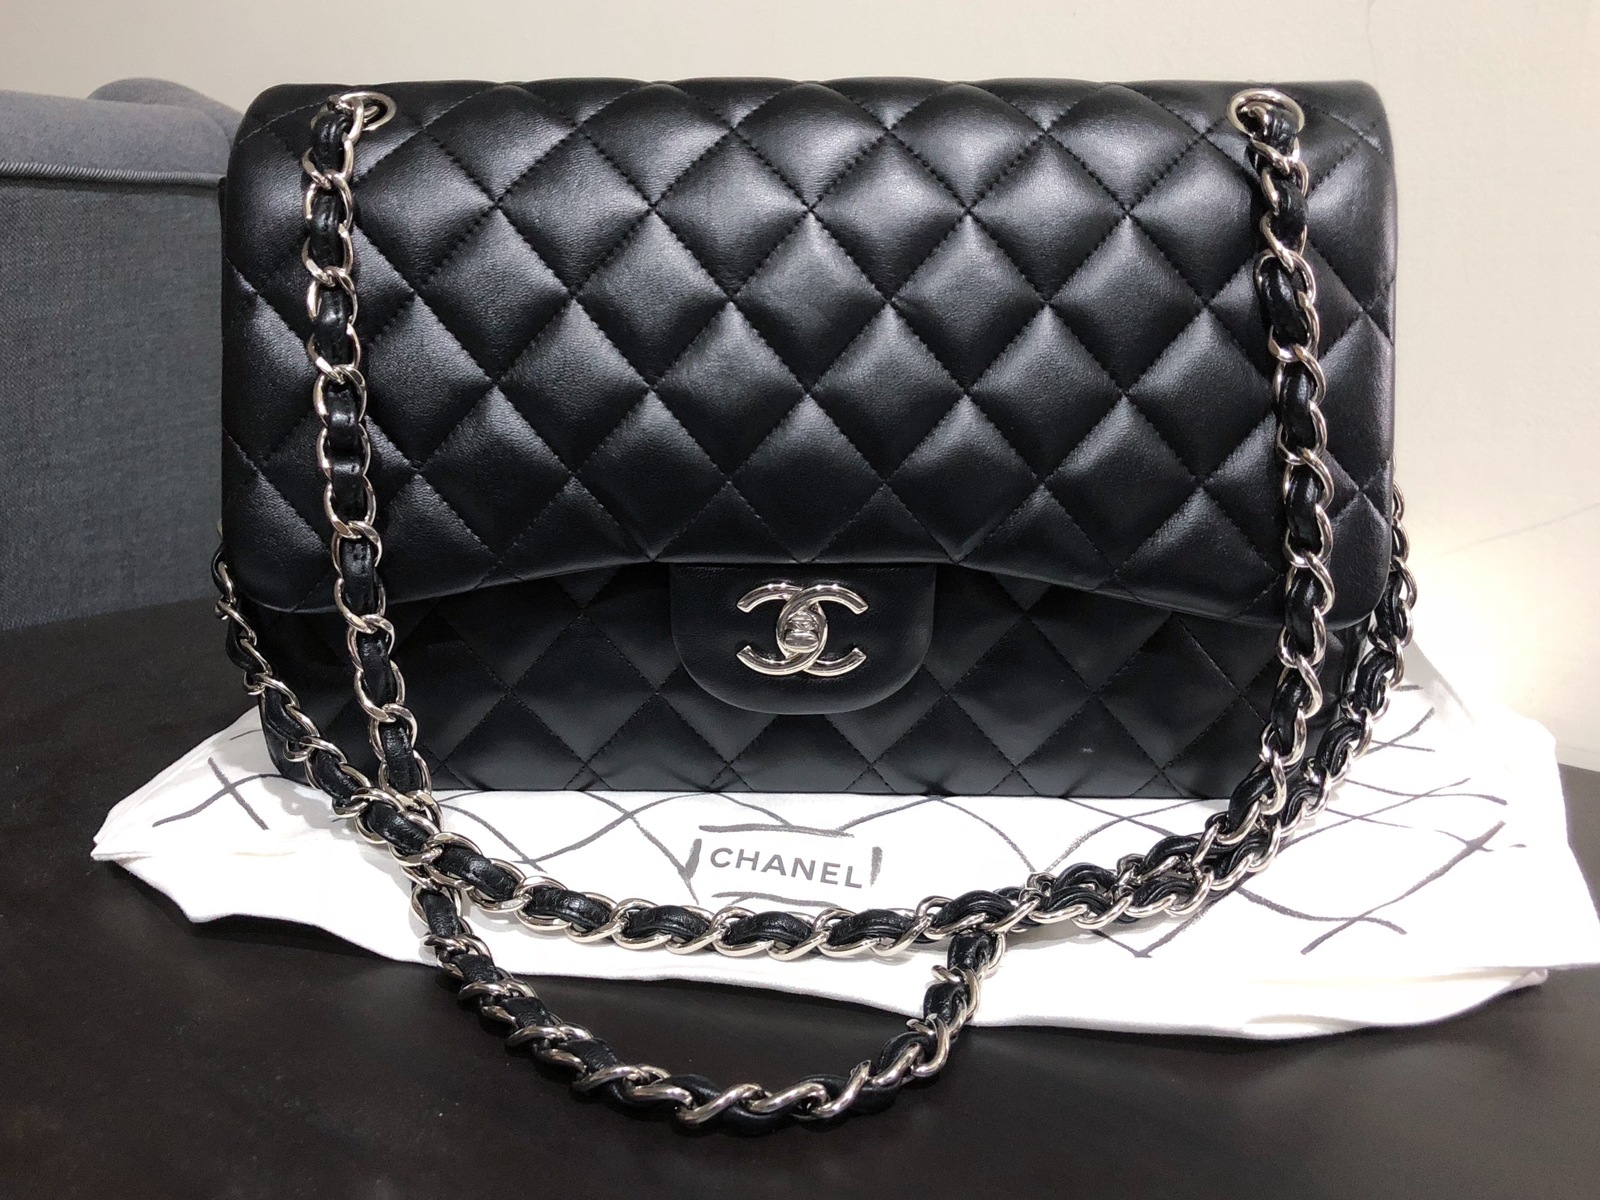 100% Authentic Chanel BLACK QUILTED LAMBSKIN JUMBO CLASSIC DOUBLE FLAP BAG  SHW